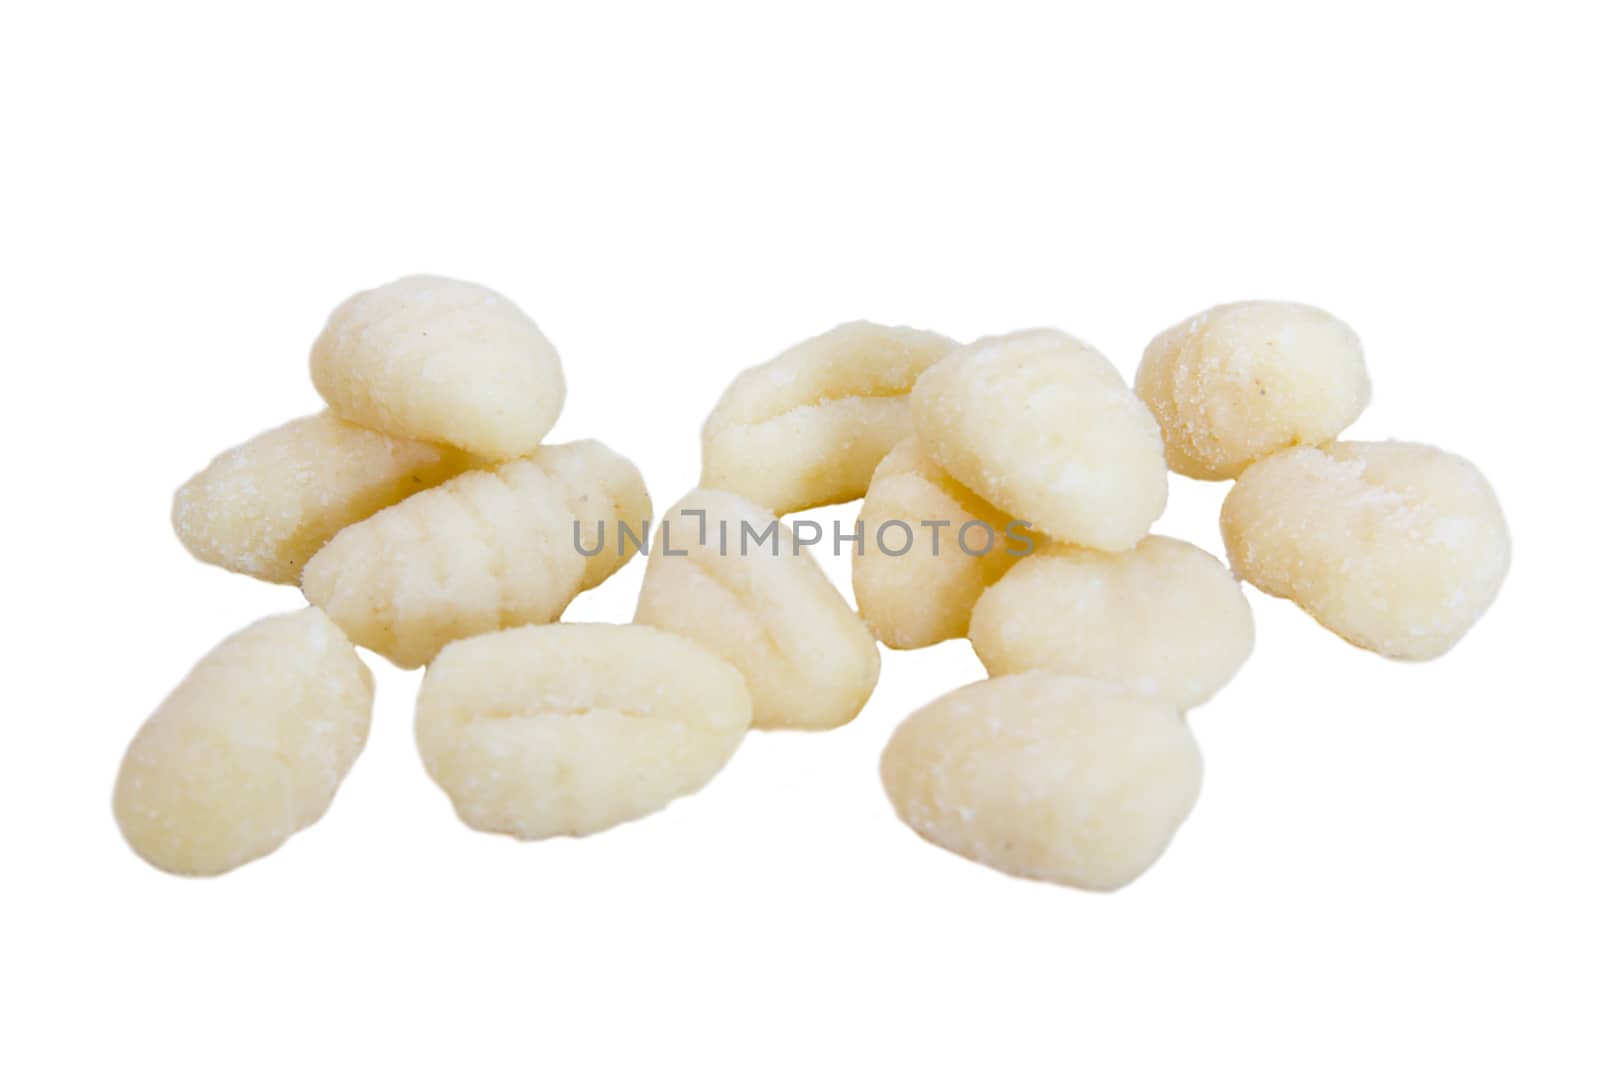 Gnocchi scattered on white background







Lupini cooked on white background